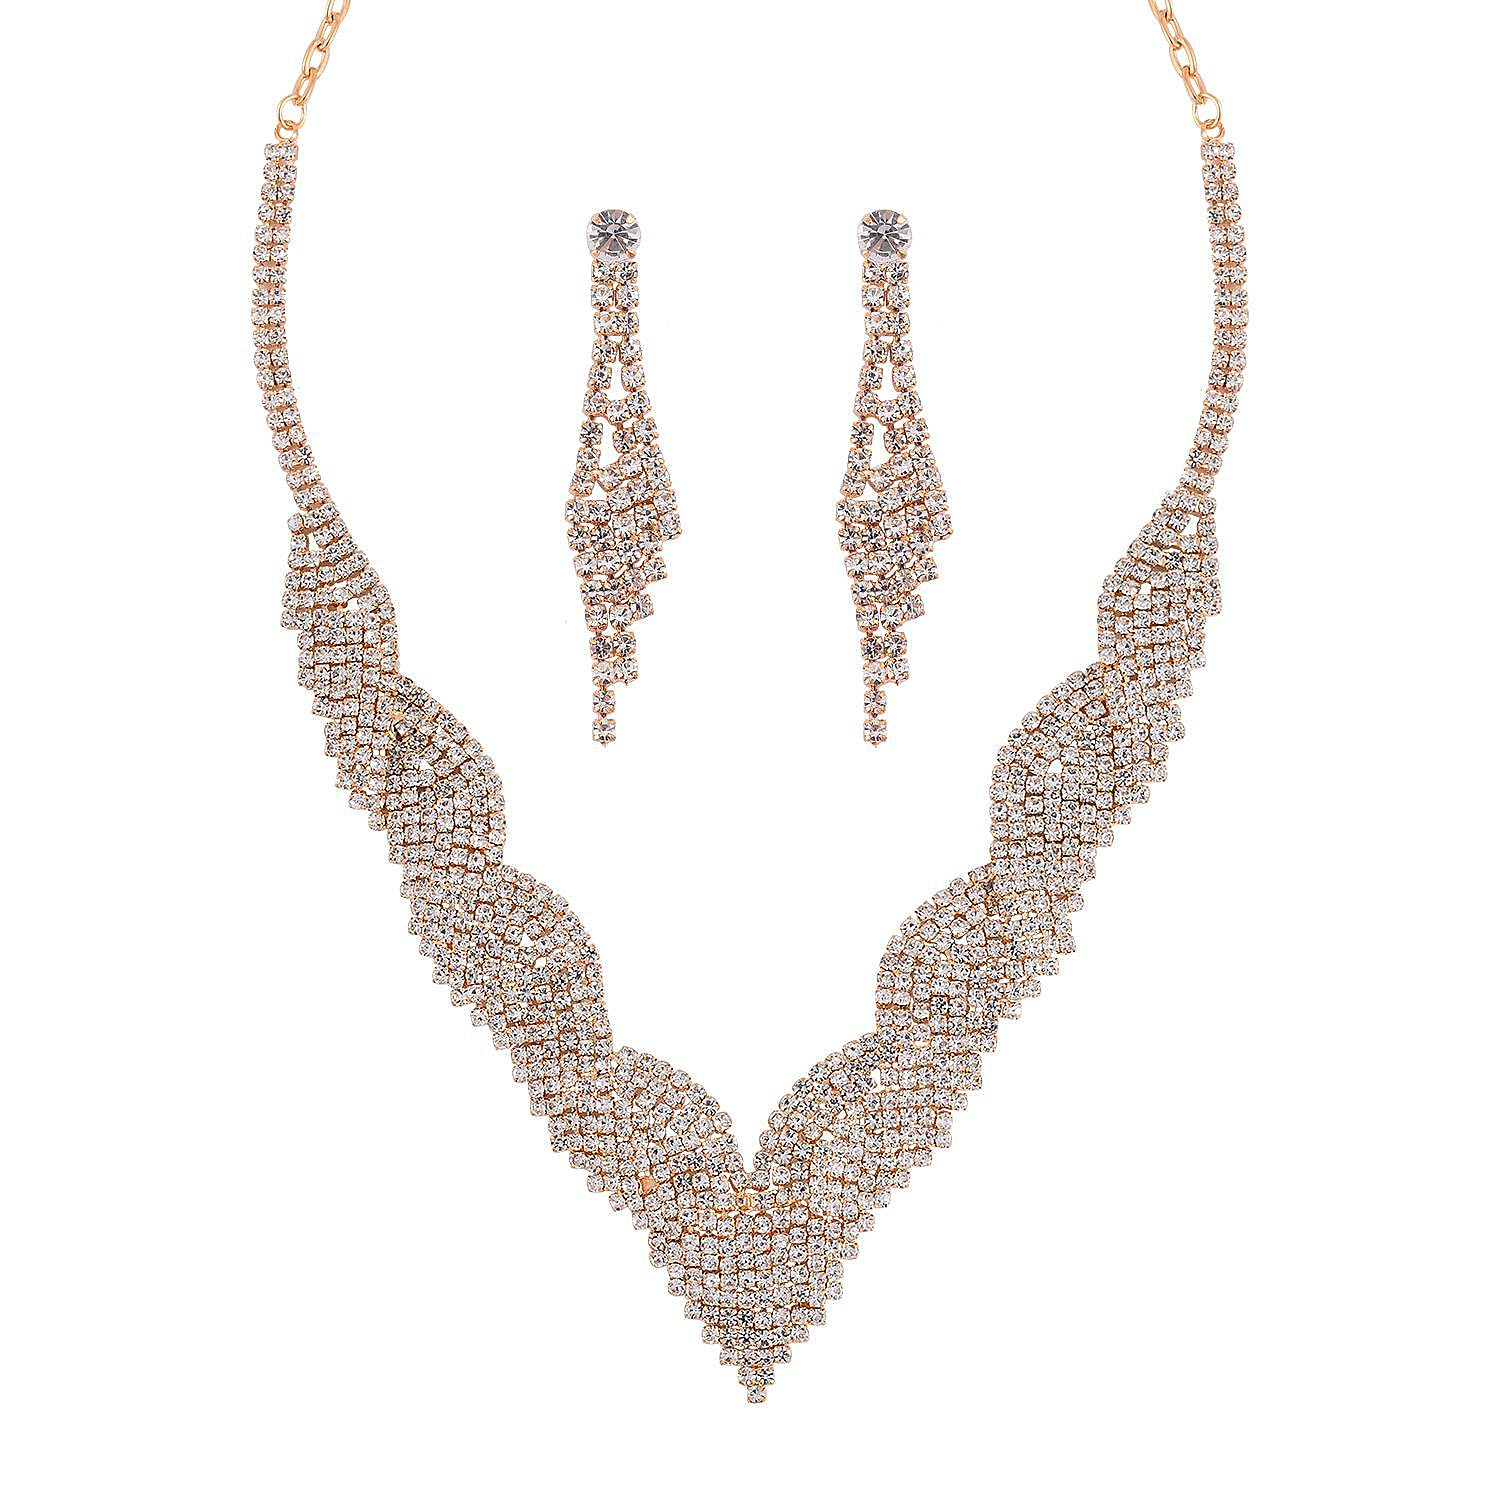 2 Piece Set - Austrian White Crystal Necklace (Size 20-2 inch Ext.) and Earrings in Gold Tone